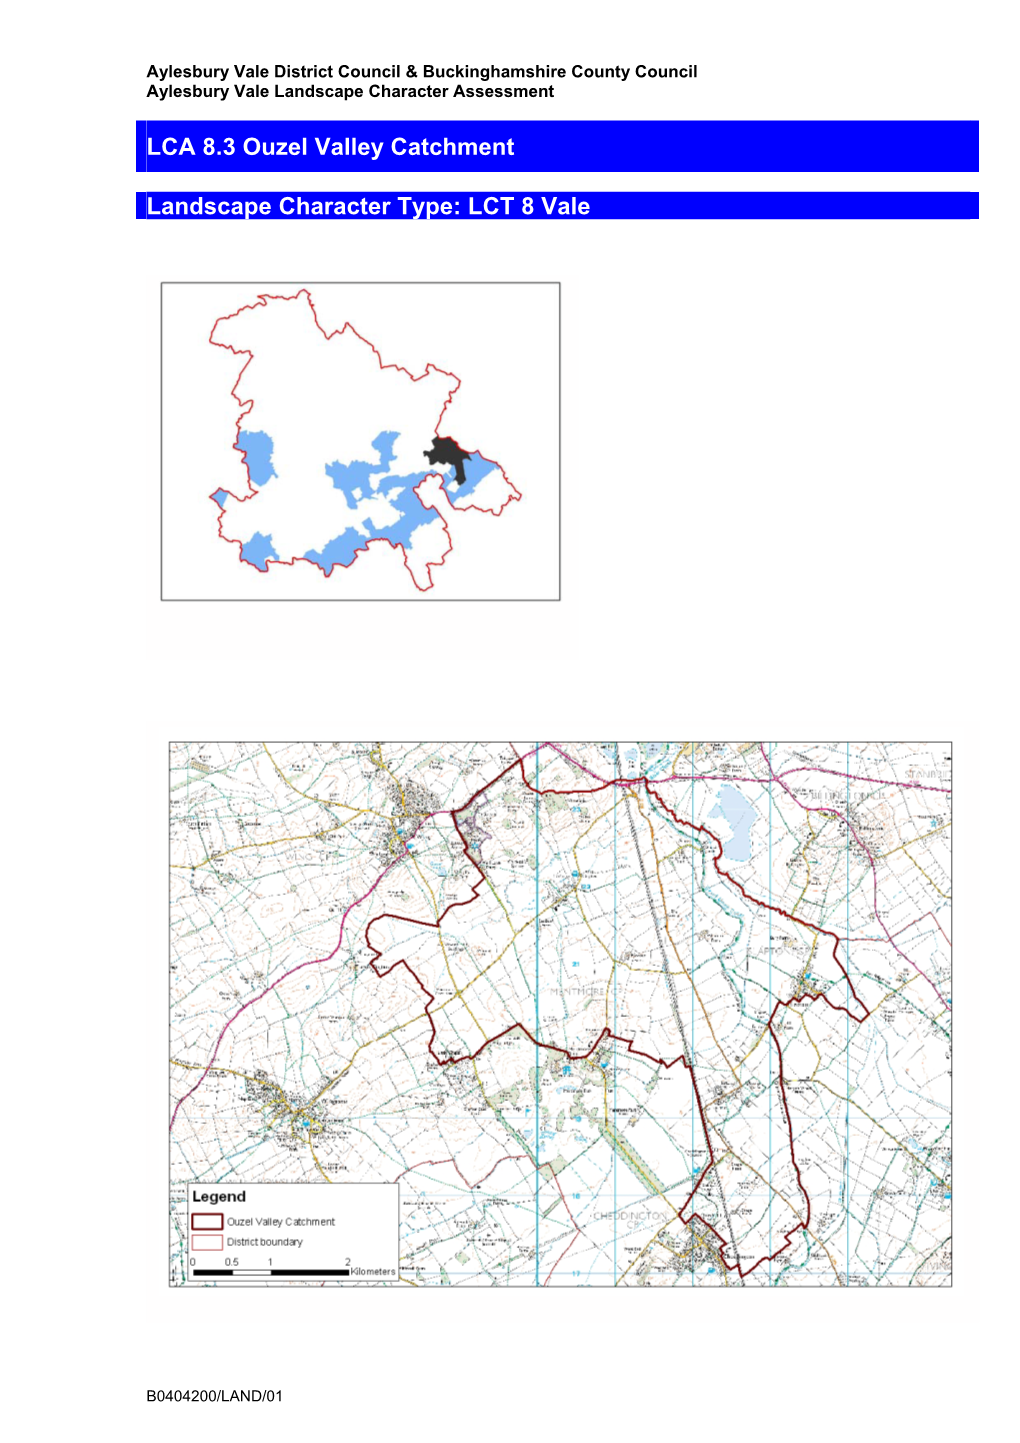 LCA 8.3 Ouzel Valley Catchment